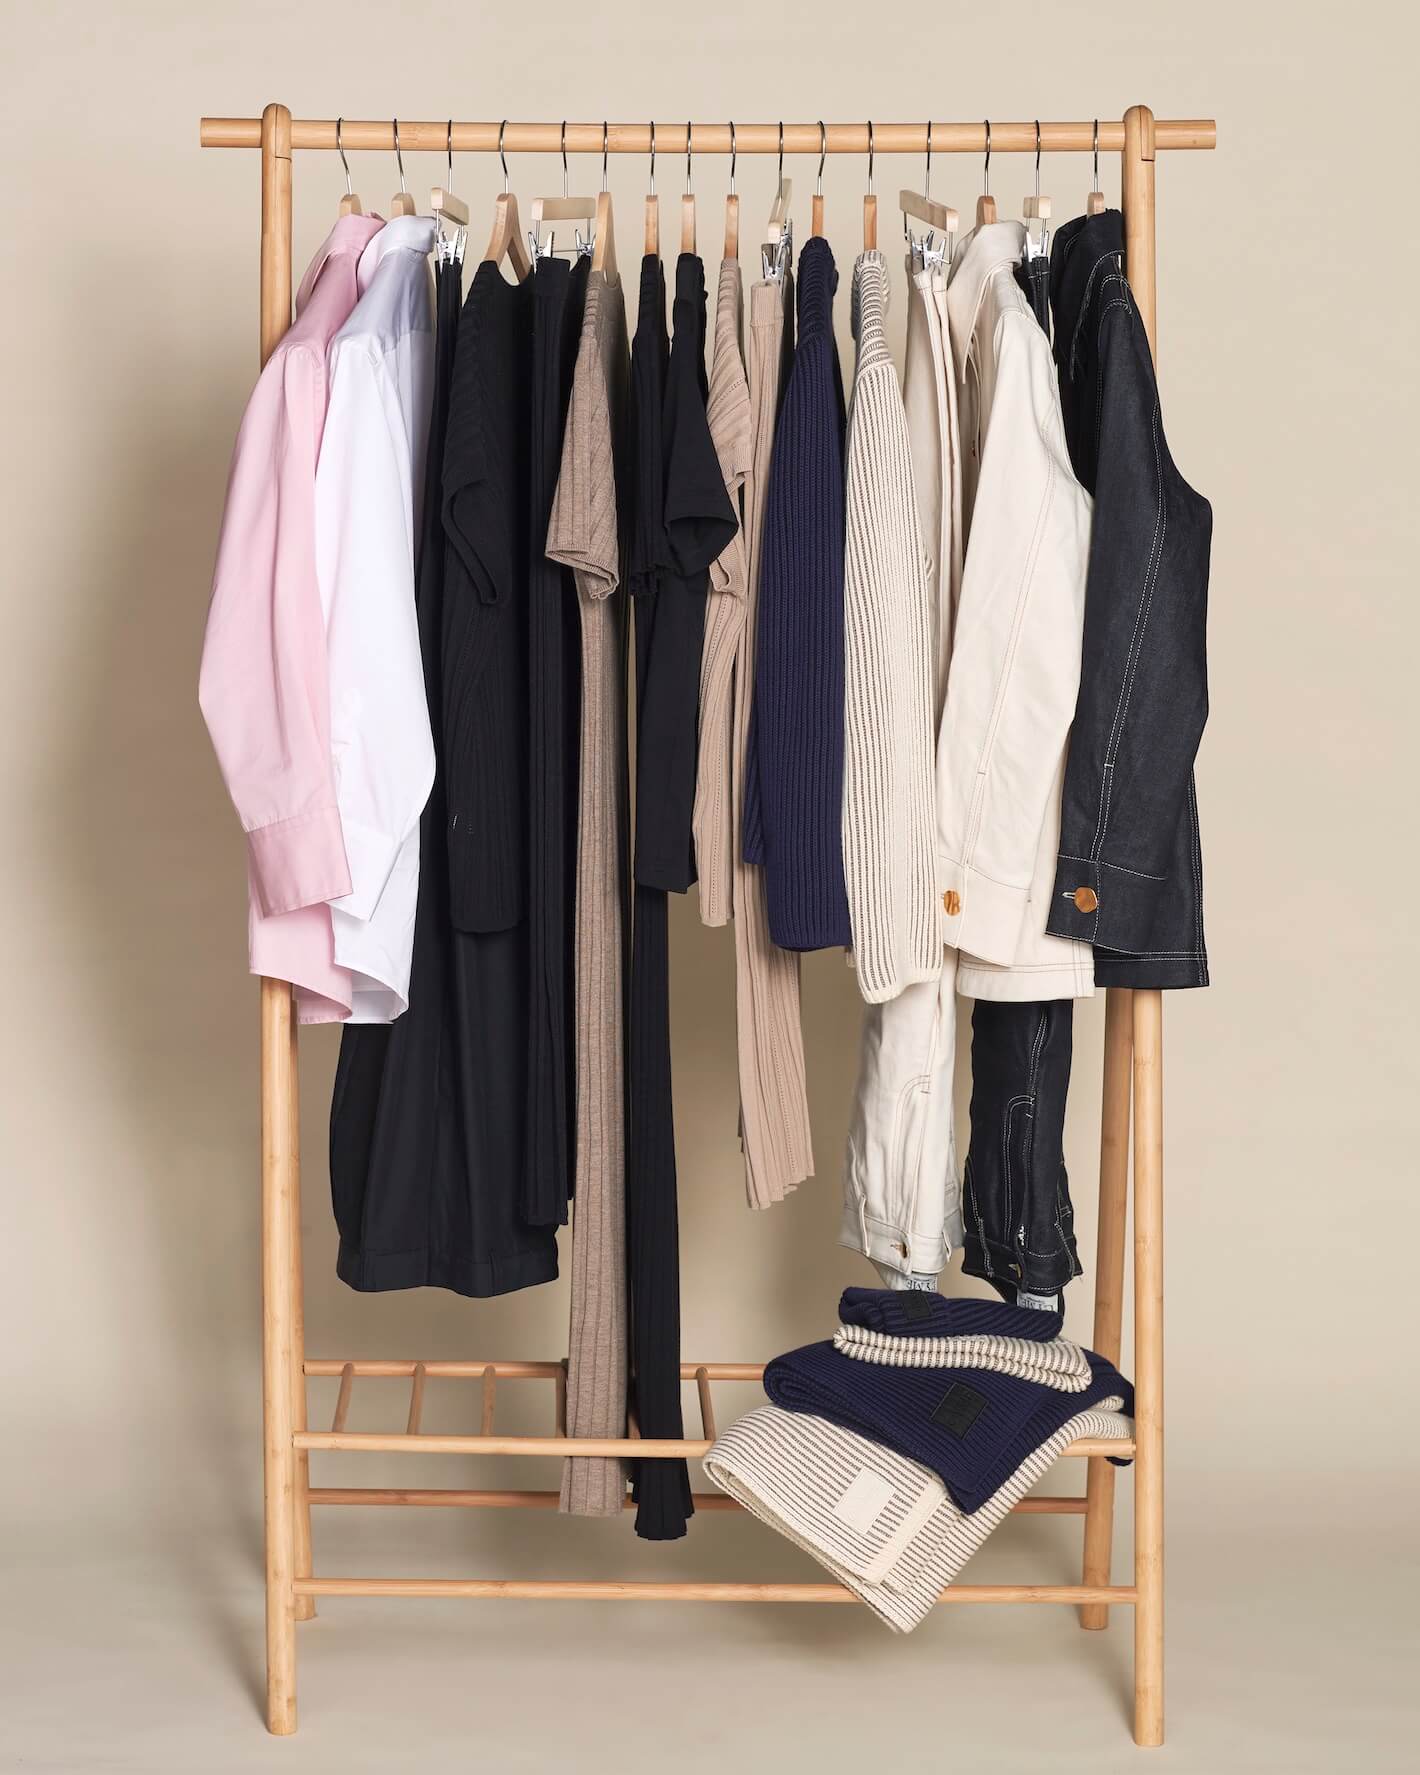 Cyme Copenhagen clothing on a rack, showcasing the timeless collections.